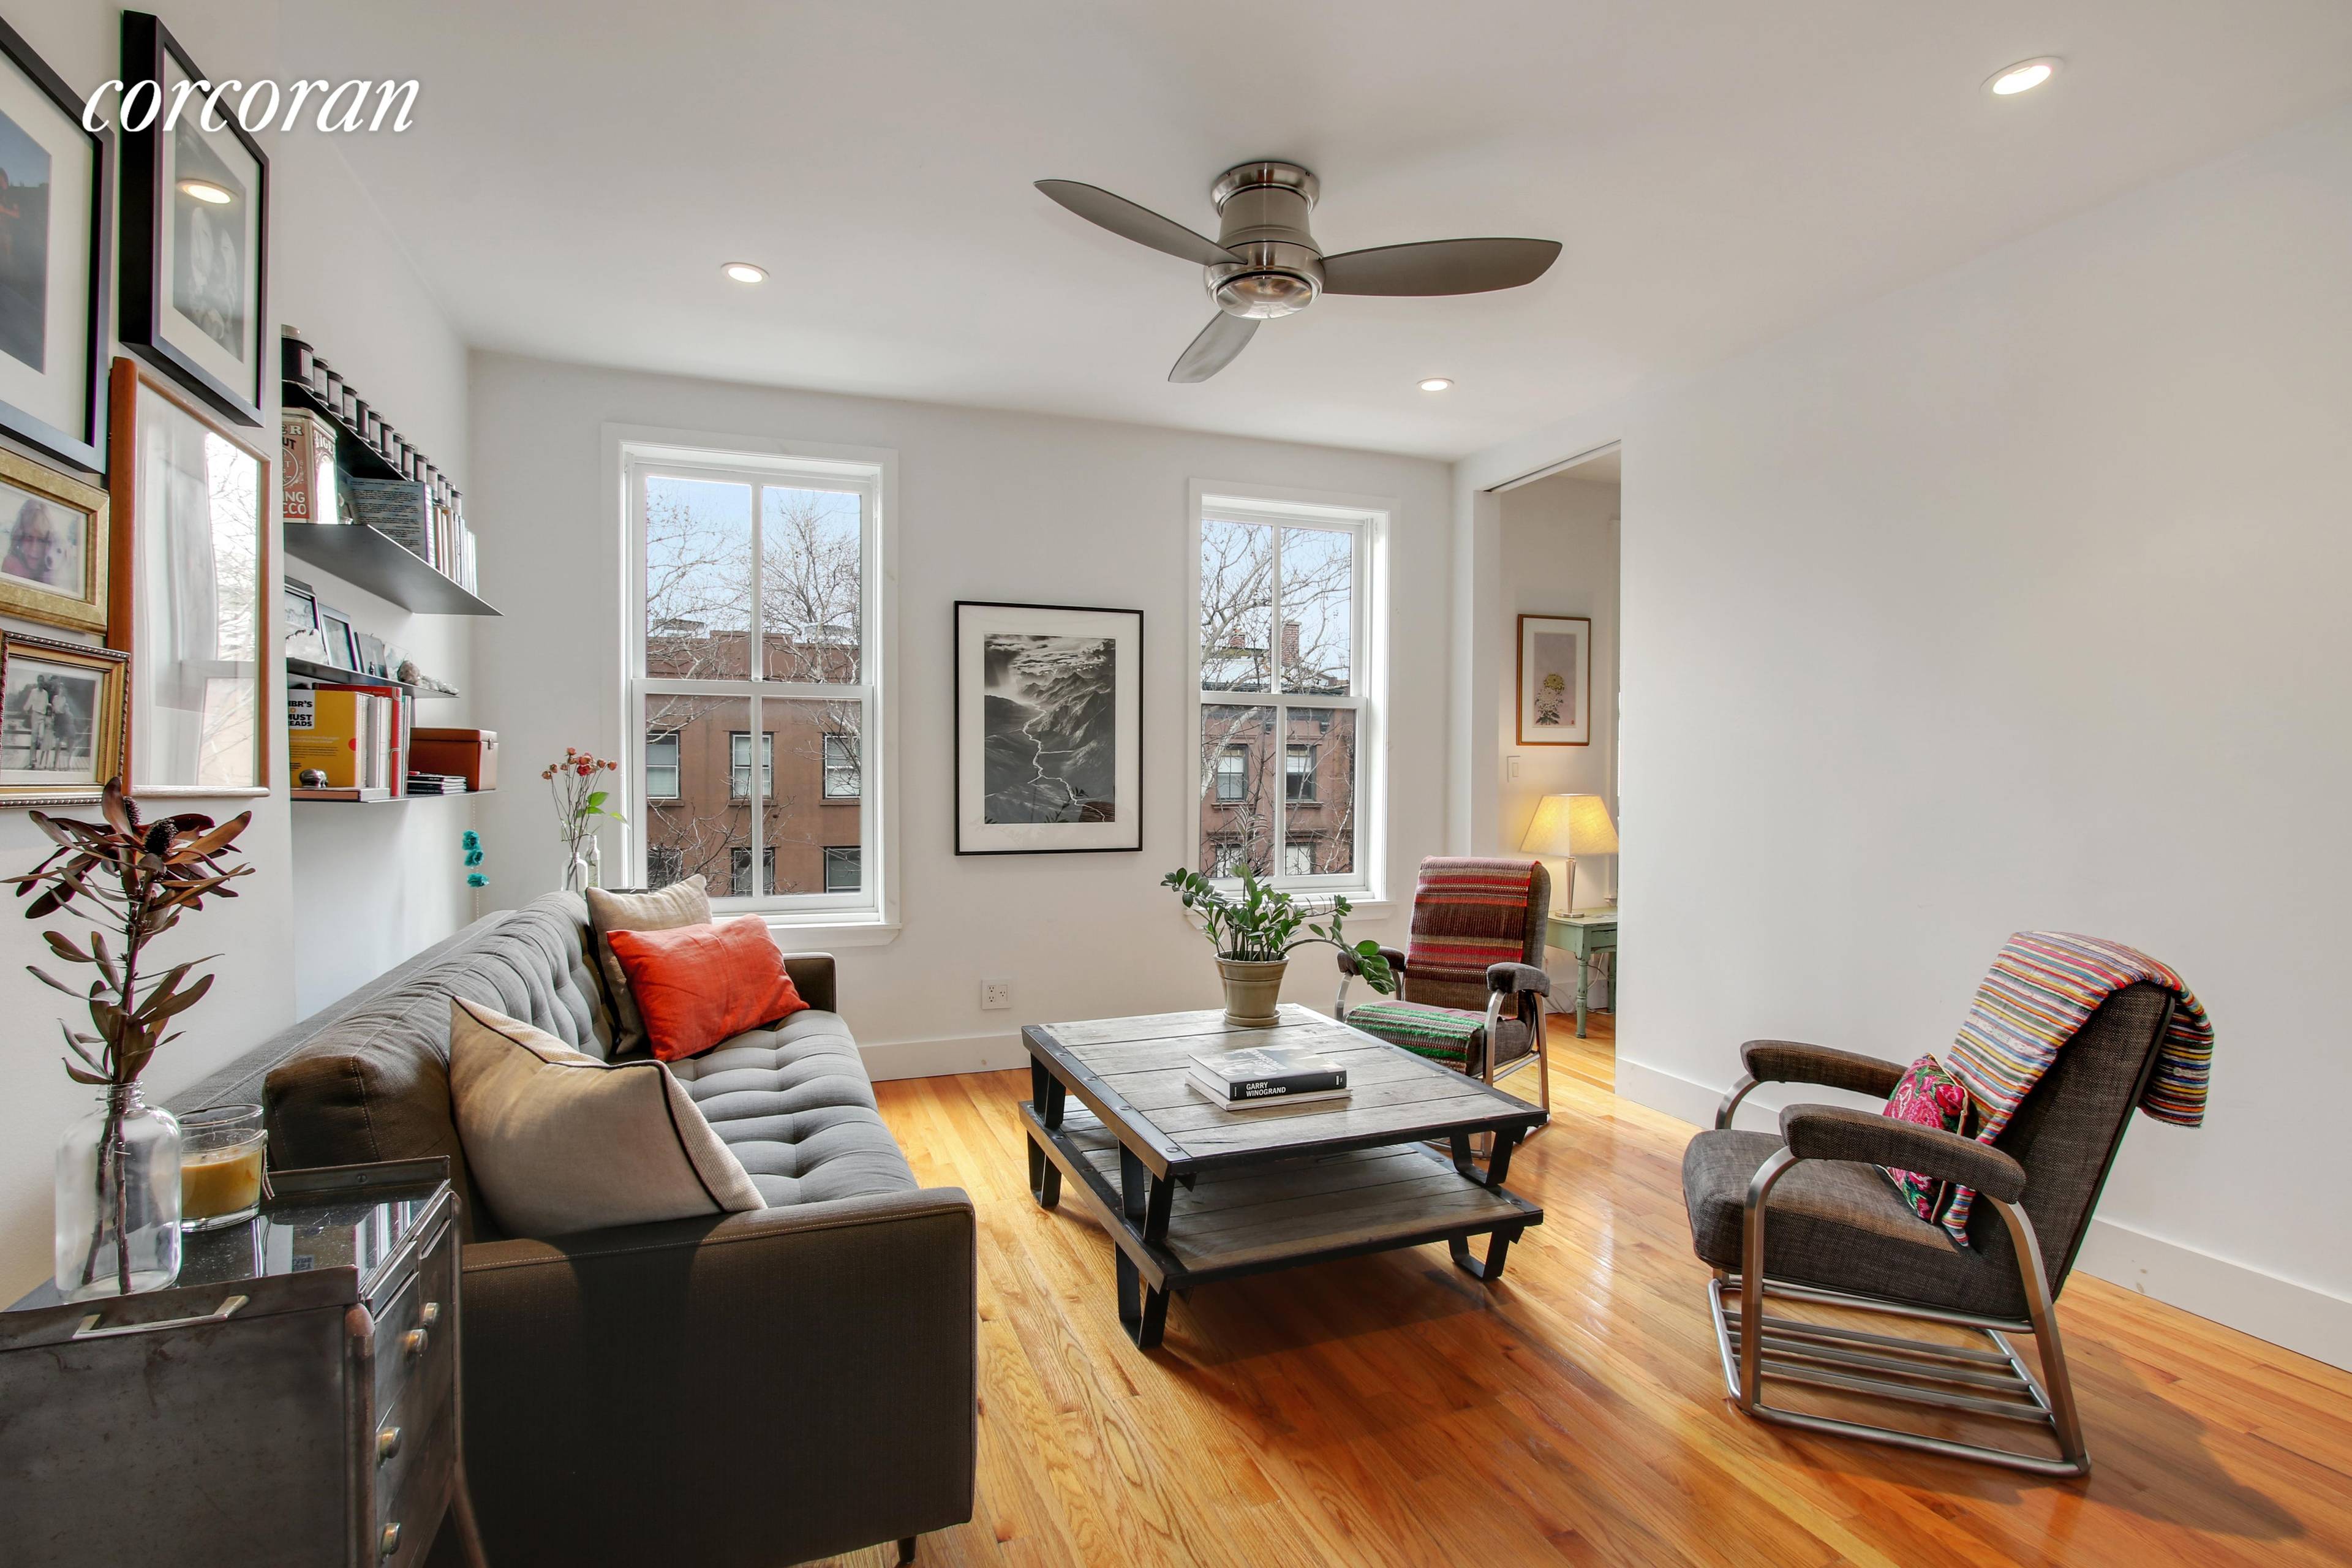 Apartment 4 at 29 Tompkins Place is a floor through one bedroom home with roof rights atop an intimate 22 foot wide townhouse in Cobble HillA s best location.